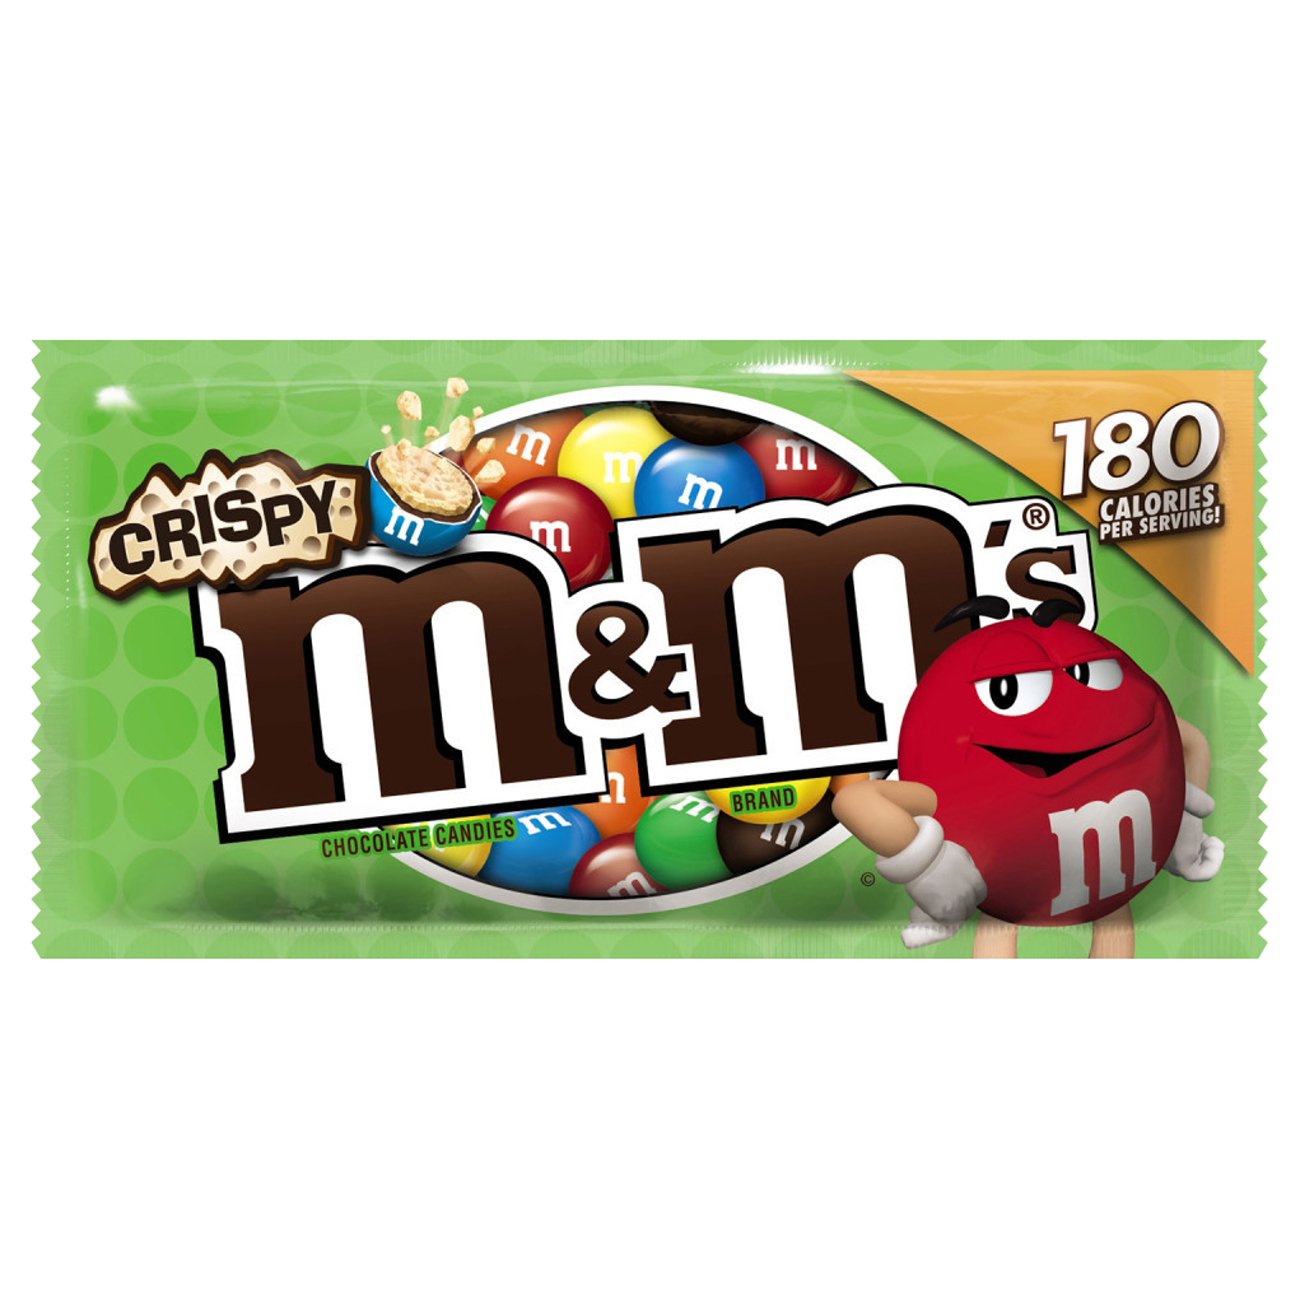 485 calories in M&m's Crispy Chocolate Large Bag (100g) calcount